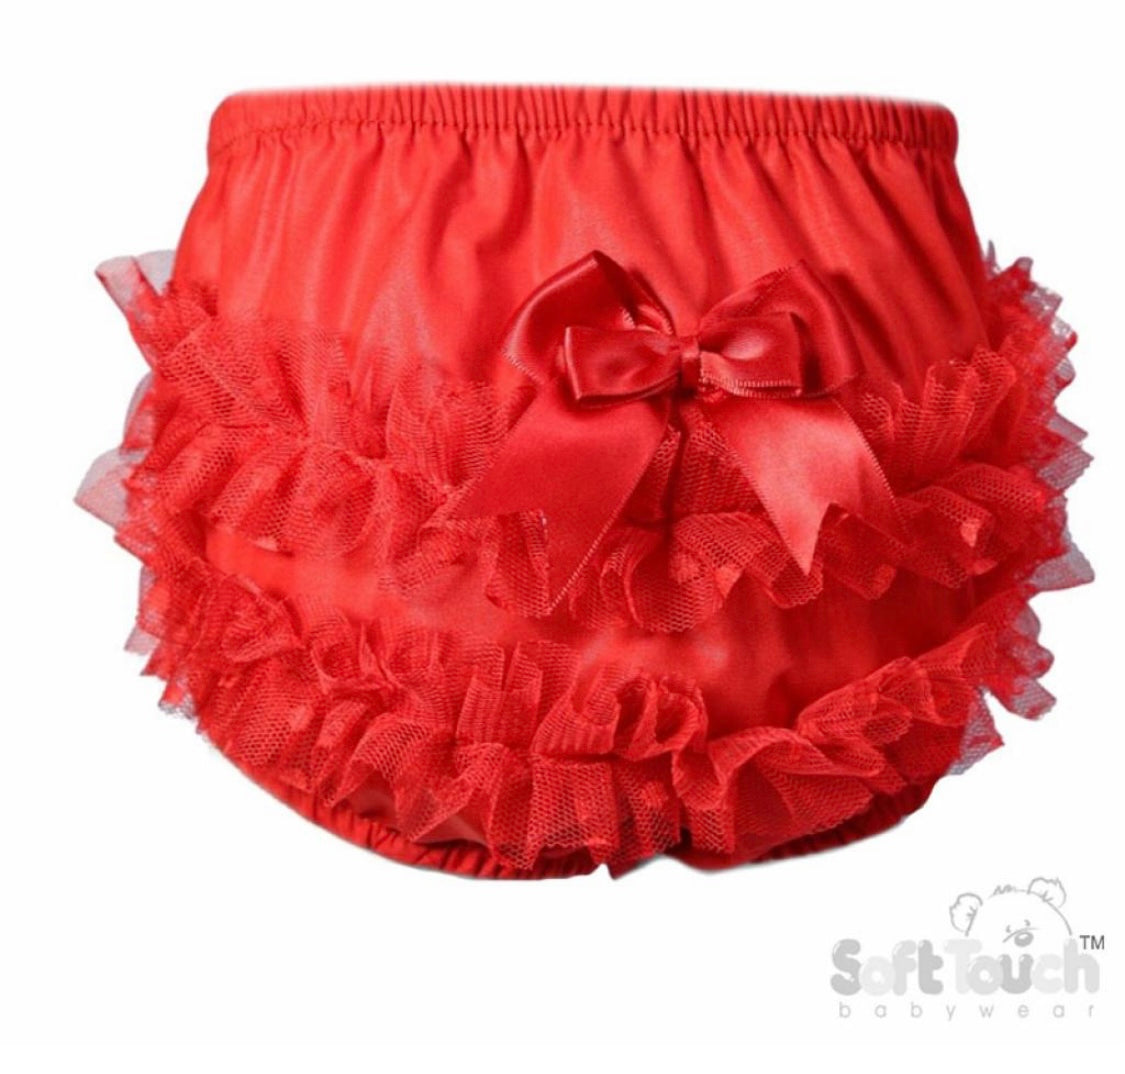 soft touch red frilly lace dotty pants knickers 